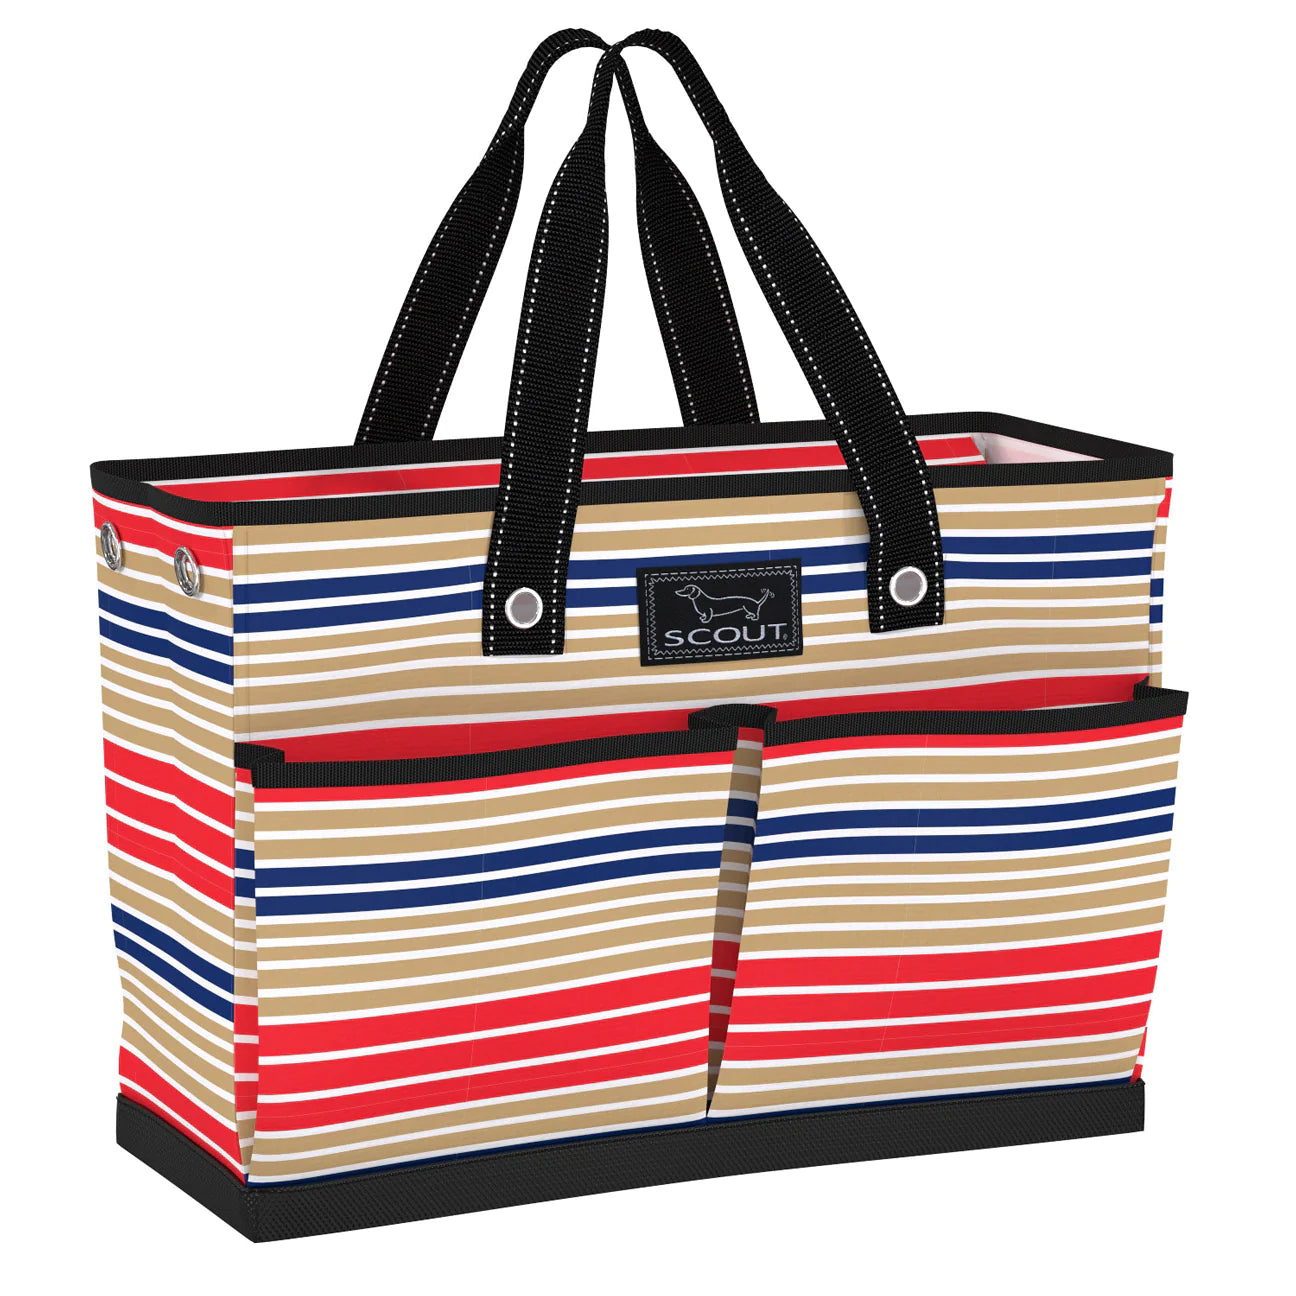 Scout Bags - Bagette Market Tote - Miami Nice